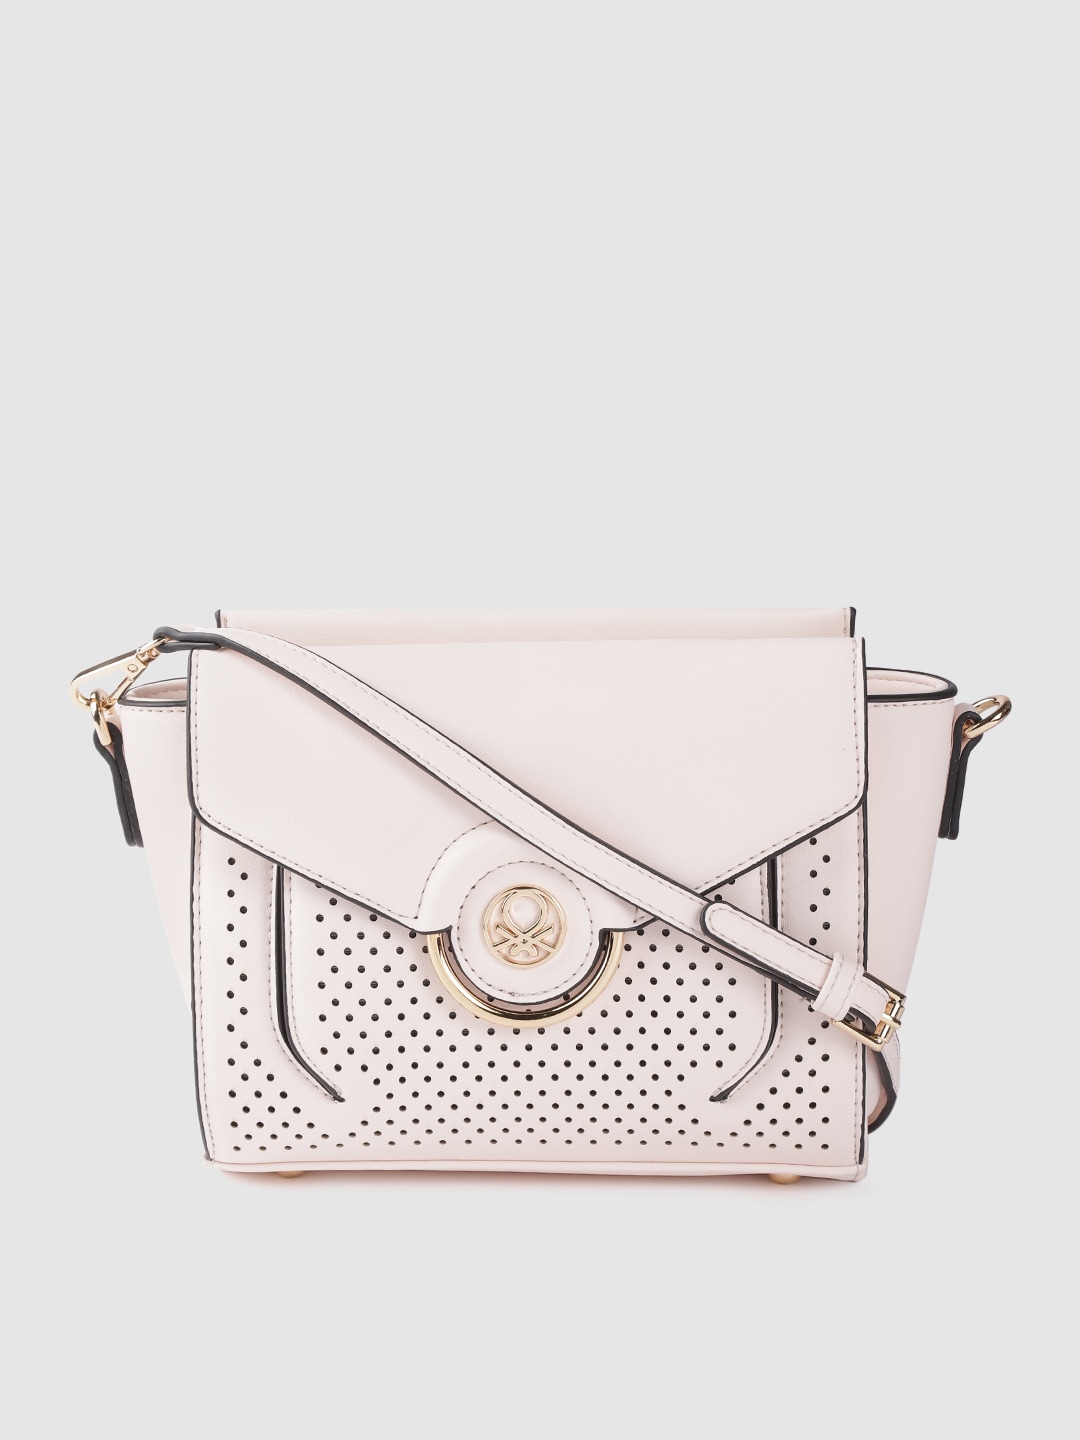 United Colors of Benetton Light Pink Laser Cut Swagger Sling Bag Price in India